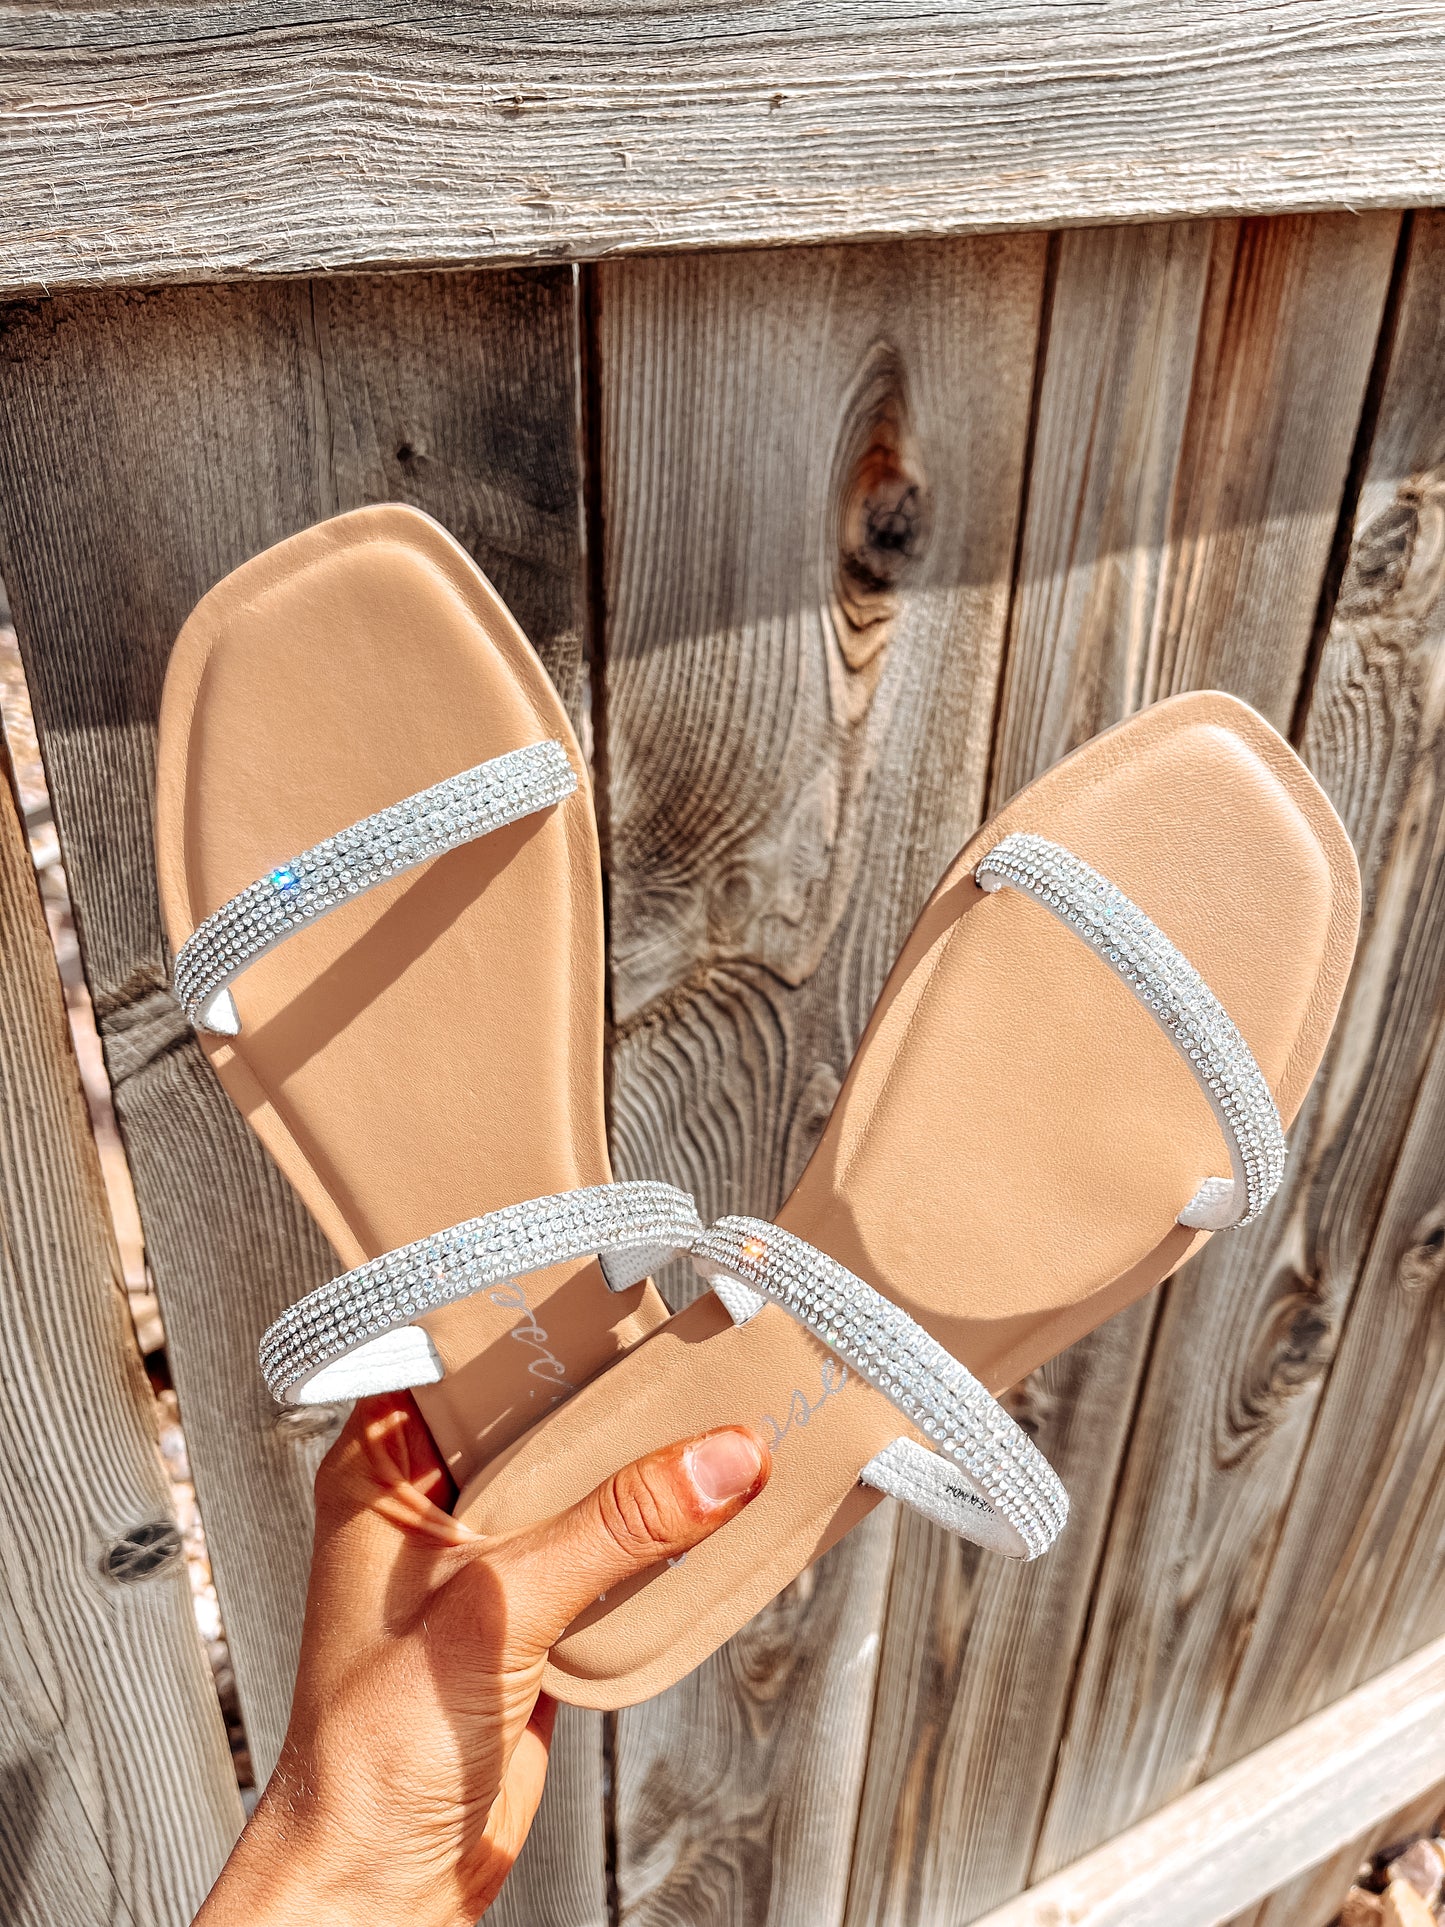 The Proposal Sandals